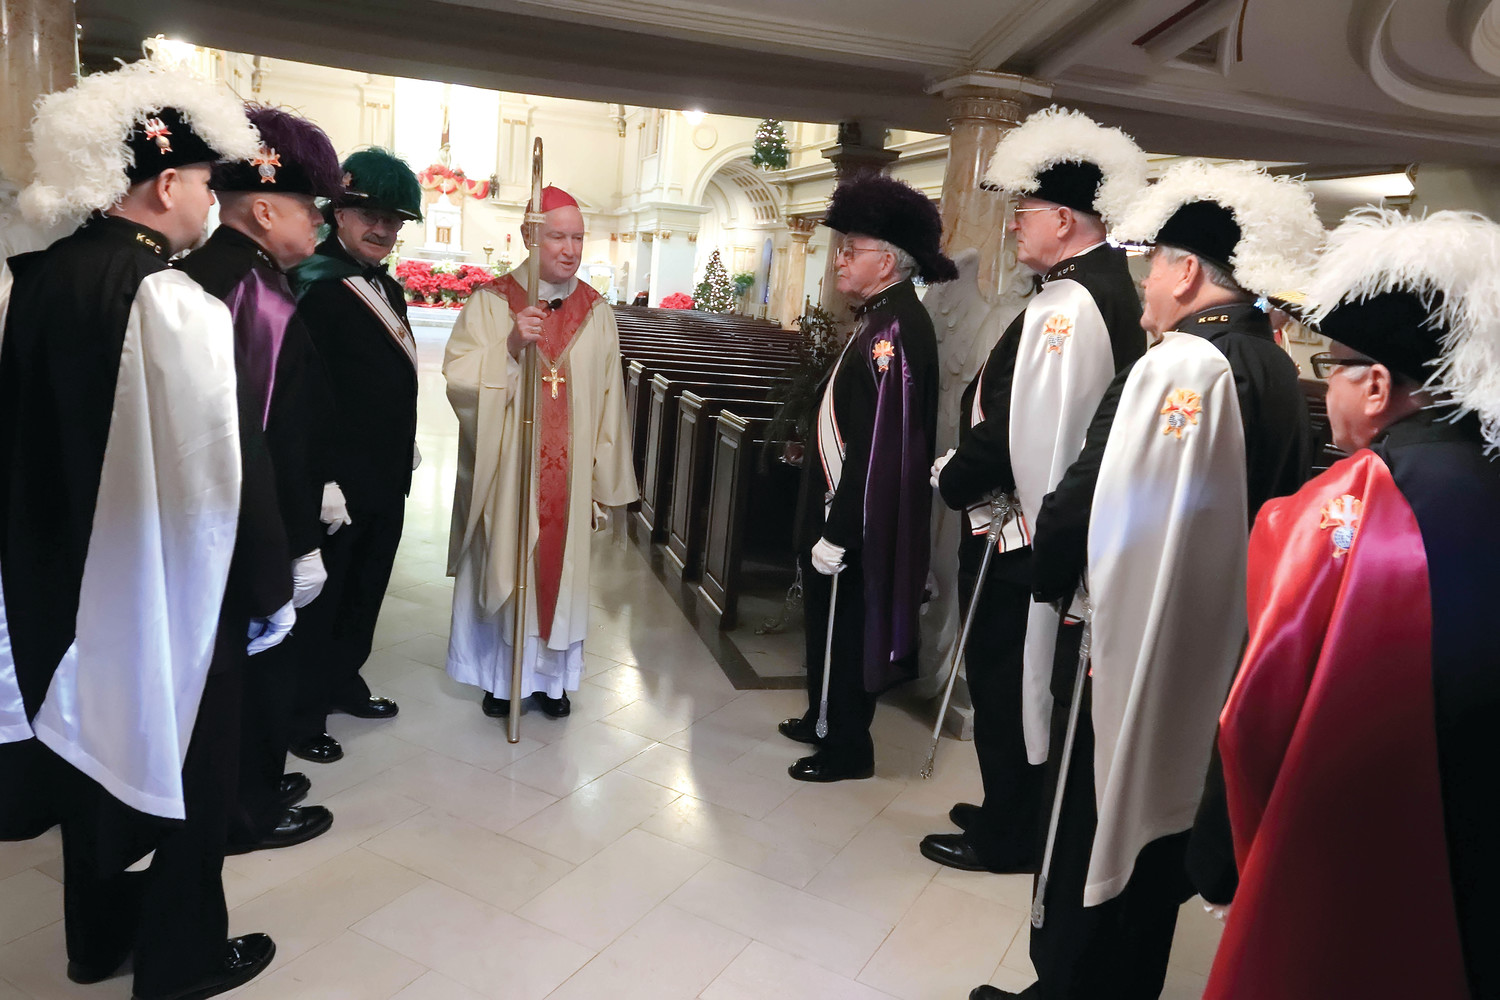 Bishop Malooly talks with members of the Knights of Columbus before the memorial Mass for Bishop Robert Mulvee at the Cathedral of Saint Peter Church, January 13, 2019.